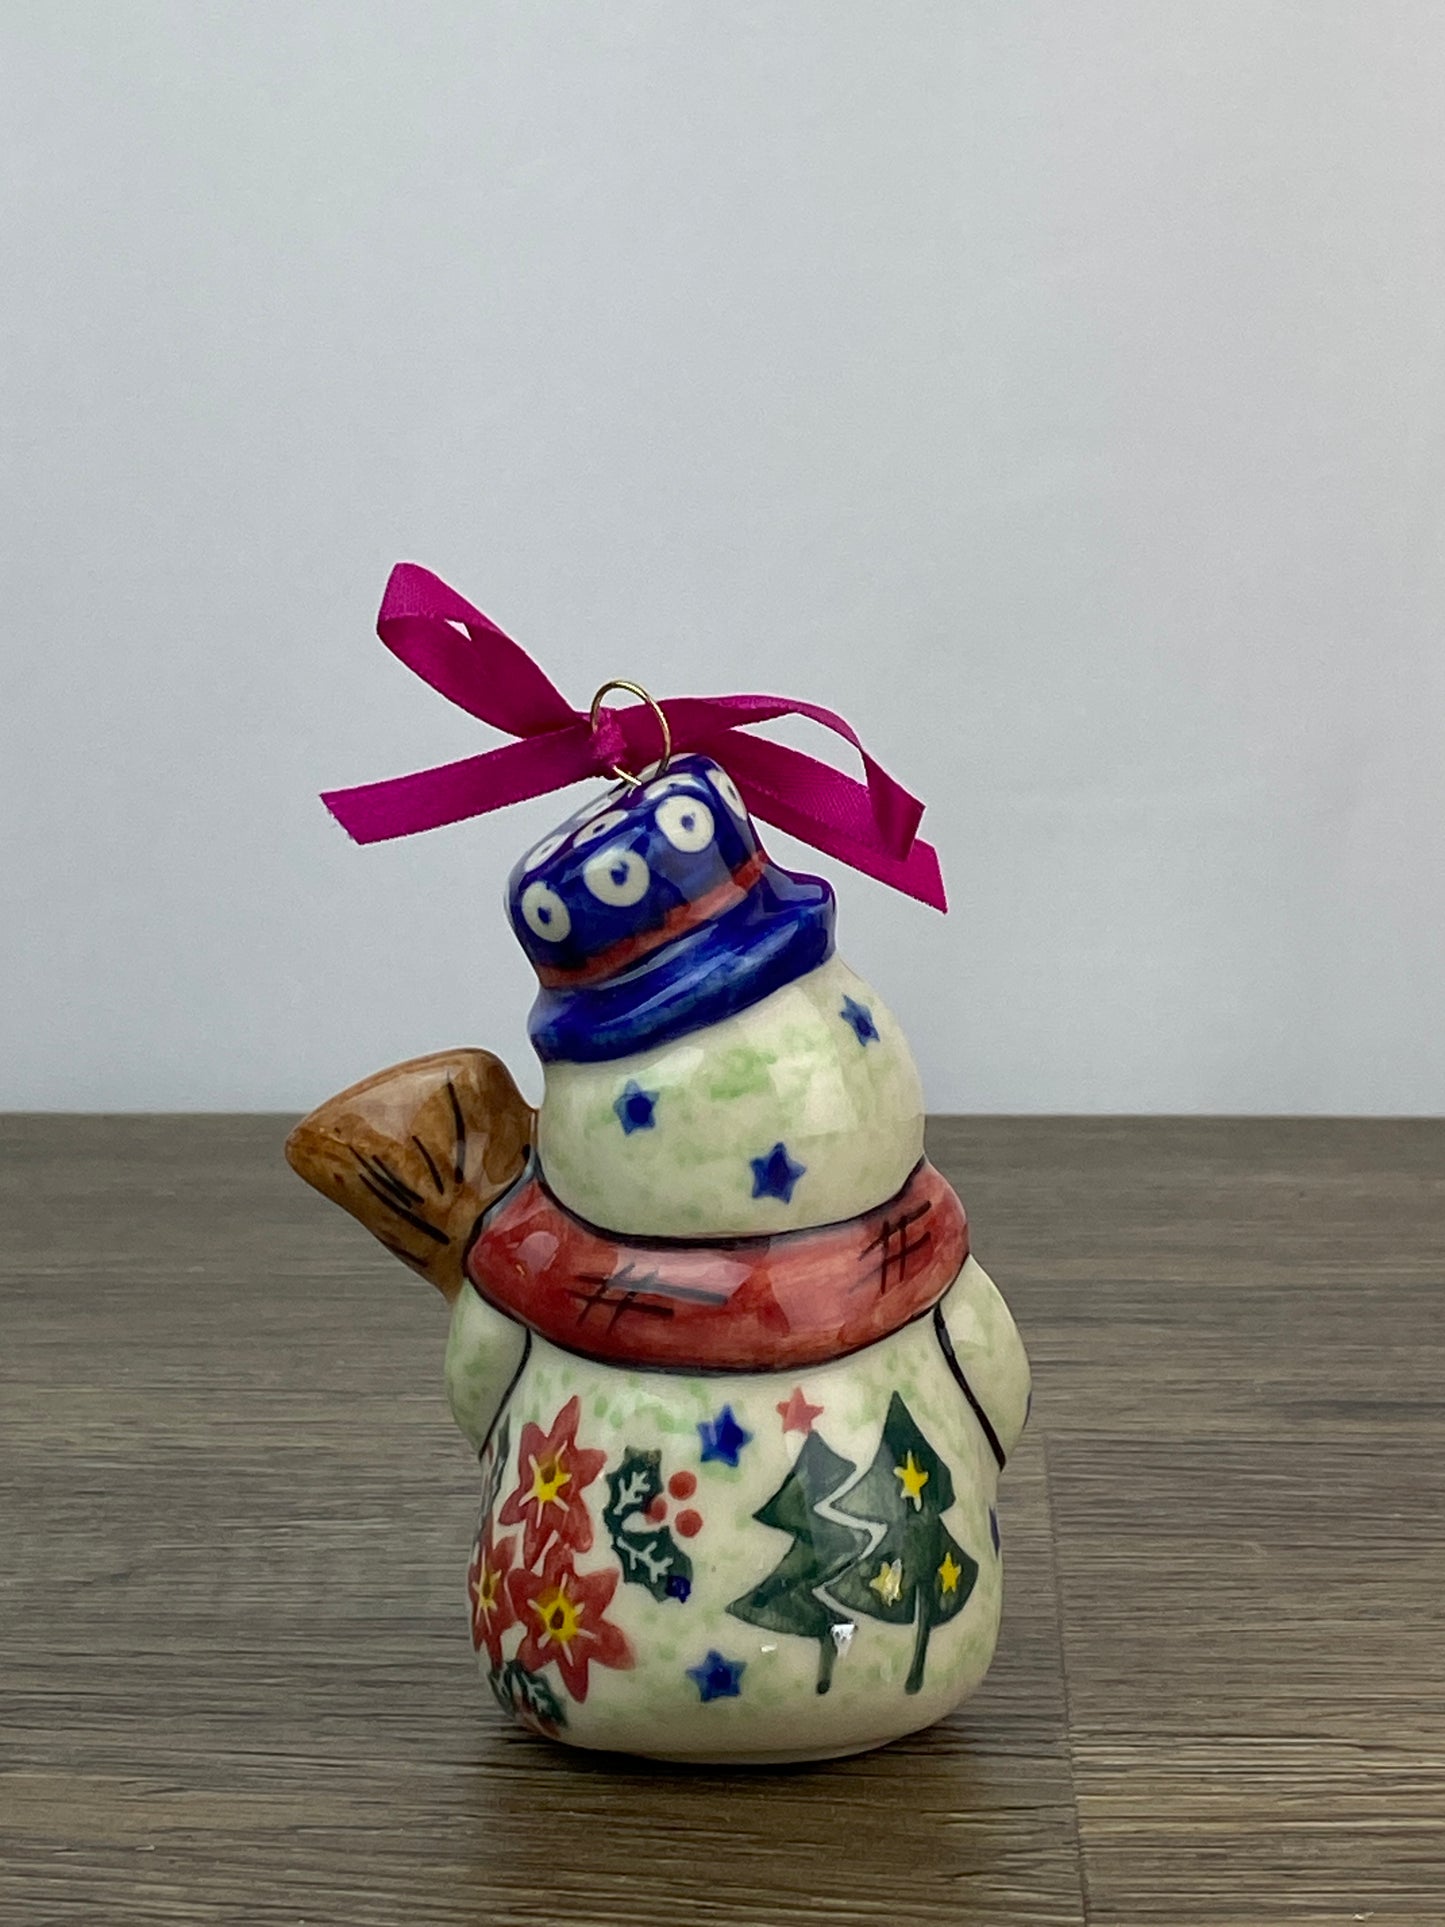 Vena Standing Snowman Ornament - Shape V354 - Red Scarf and Christmas Tree